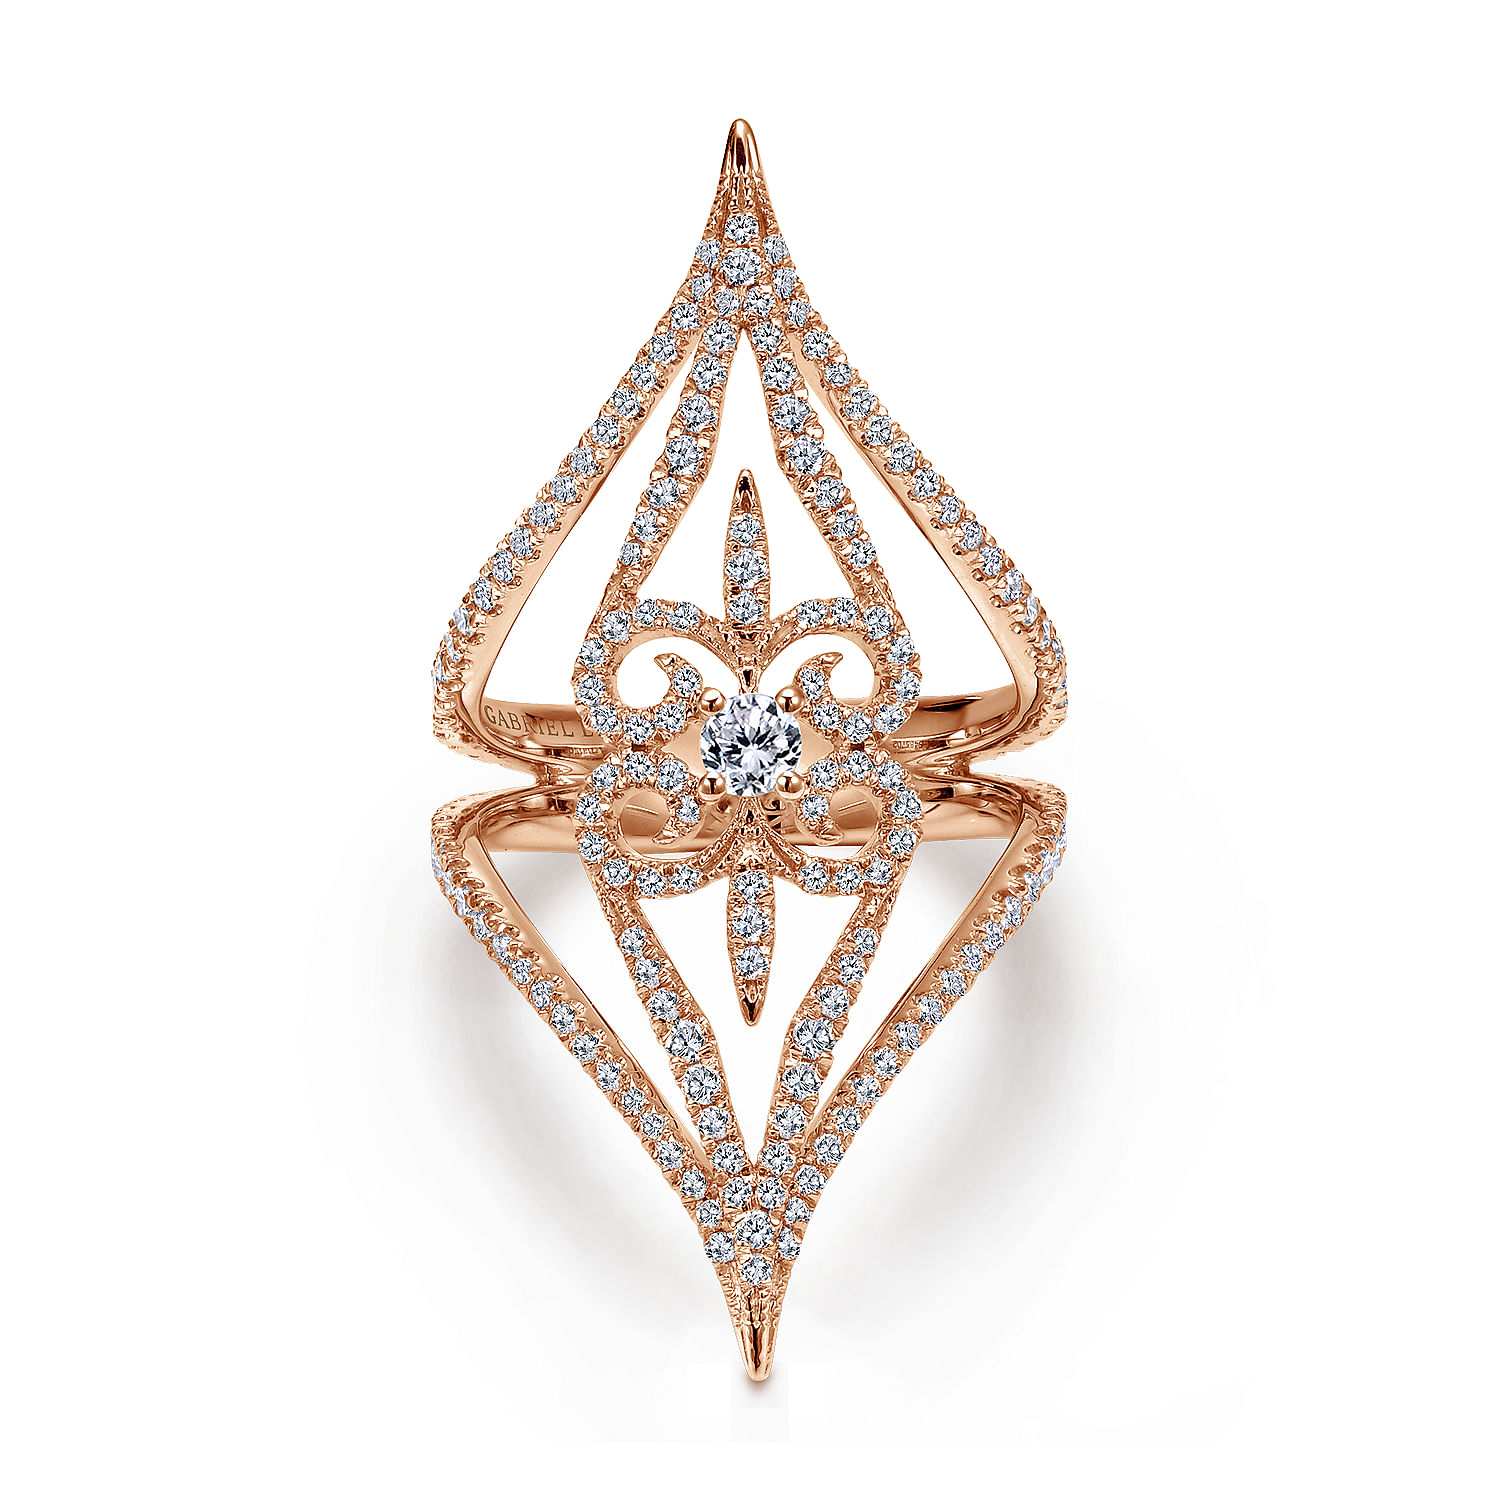 18K Rose Gold Wide Open Floral Diamond Statement Ring